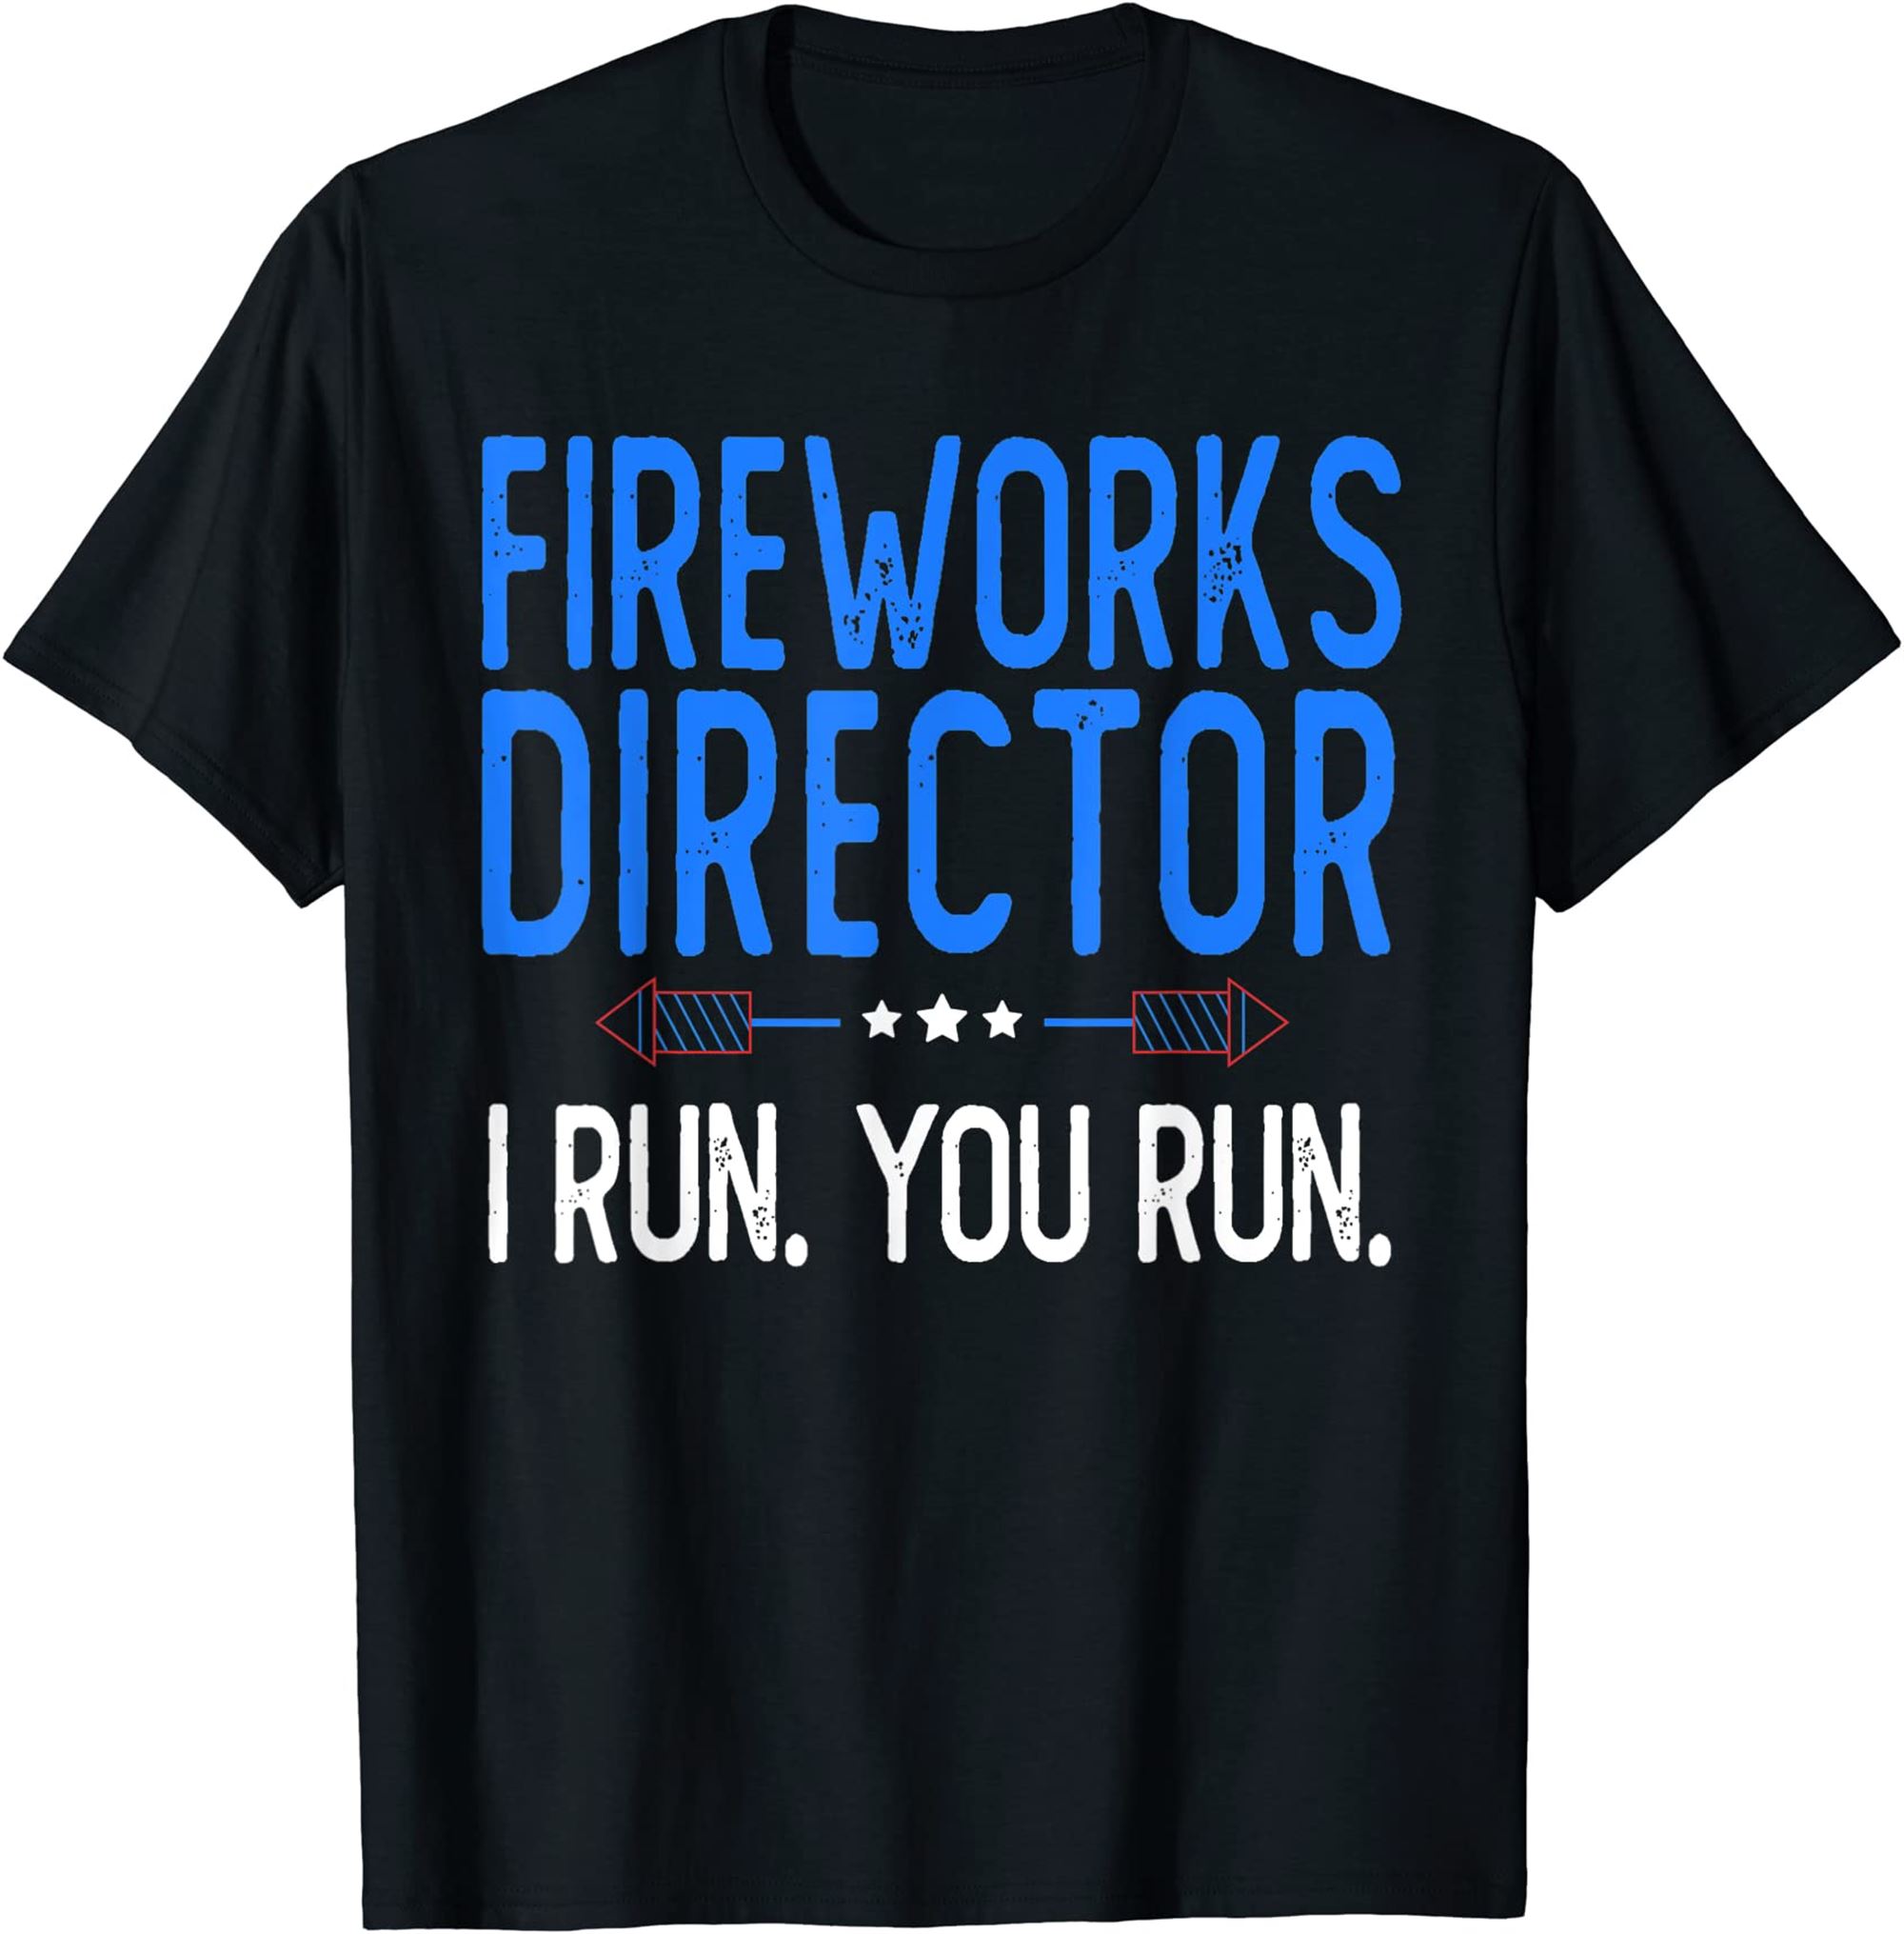 Fireworks Director I Run You Run Great American 4th Of July T-shirt Full Size Up To 5xl